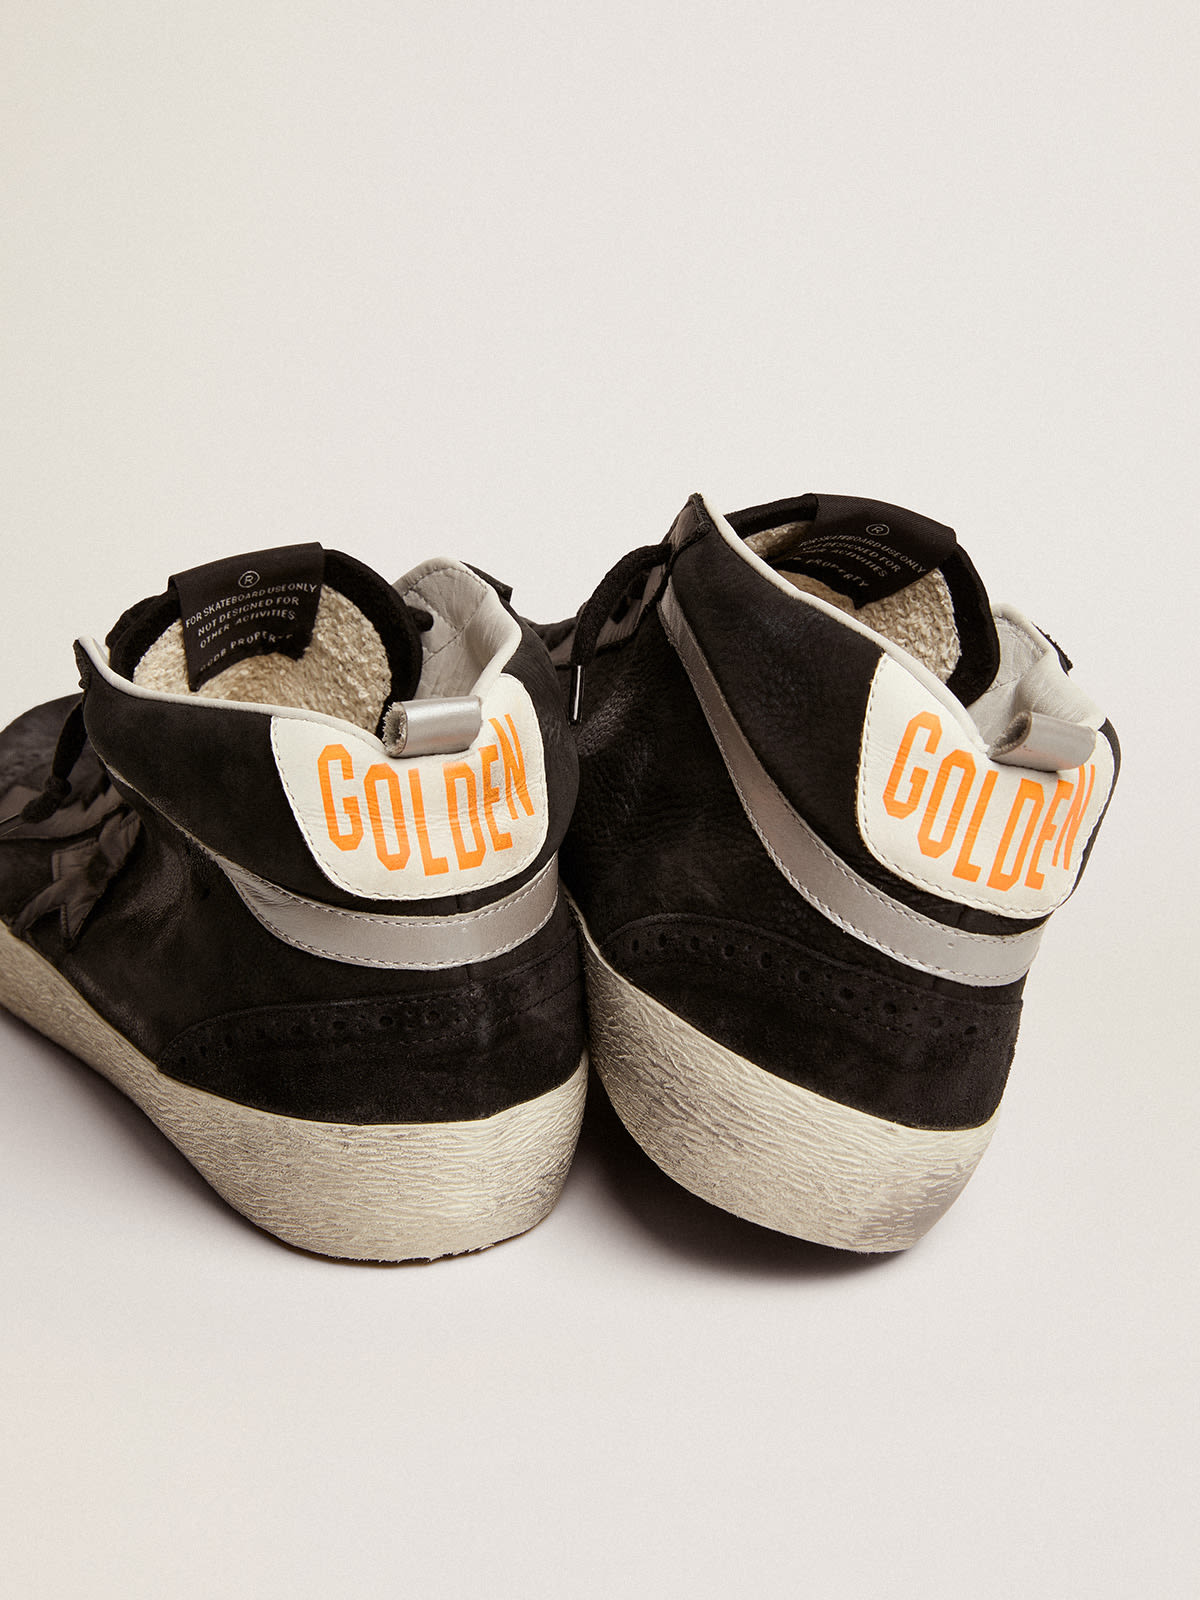 Golden Goose - Men's Mid Star in nubuck with black leather star and silver flash in 